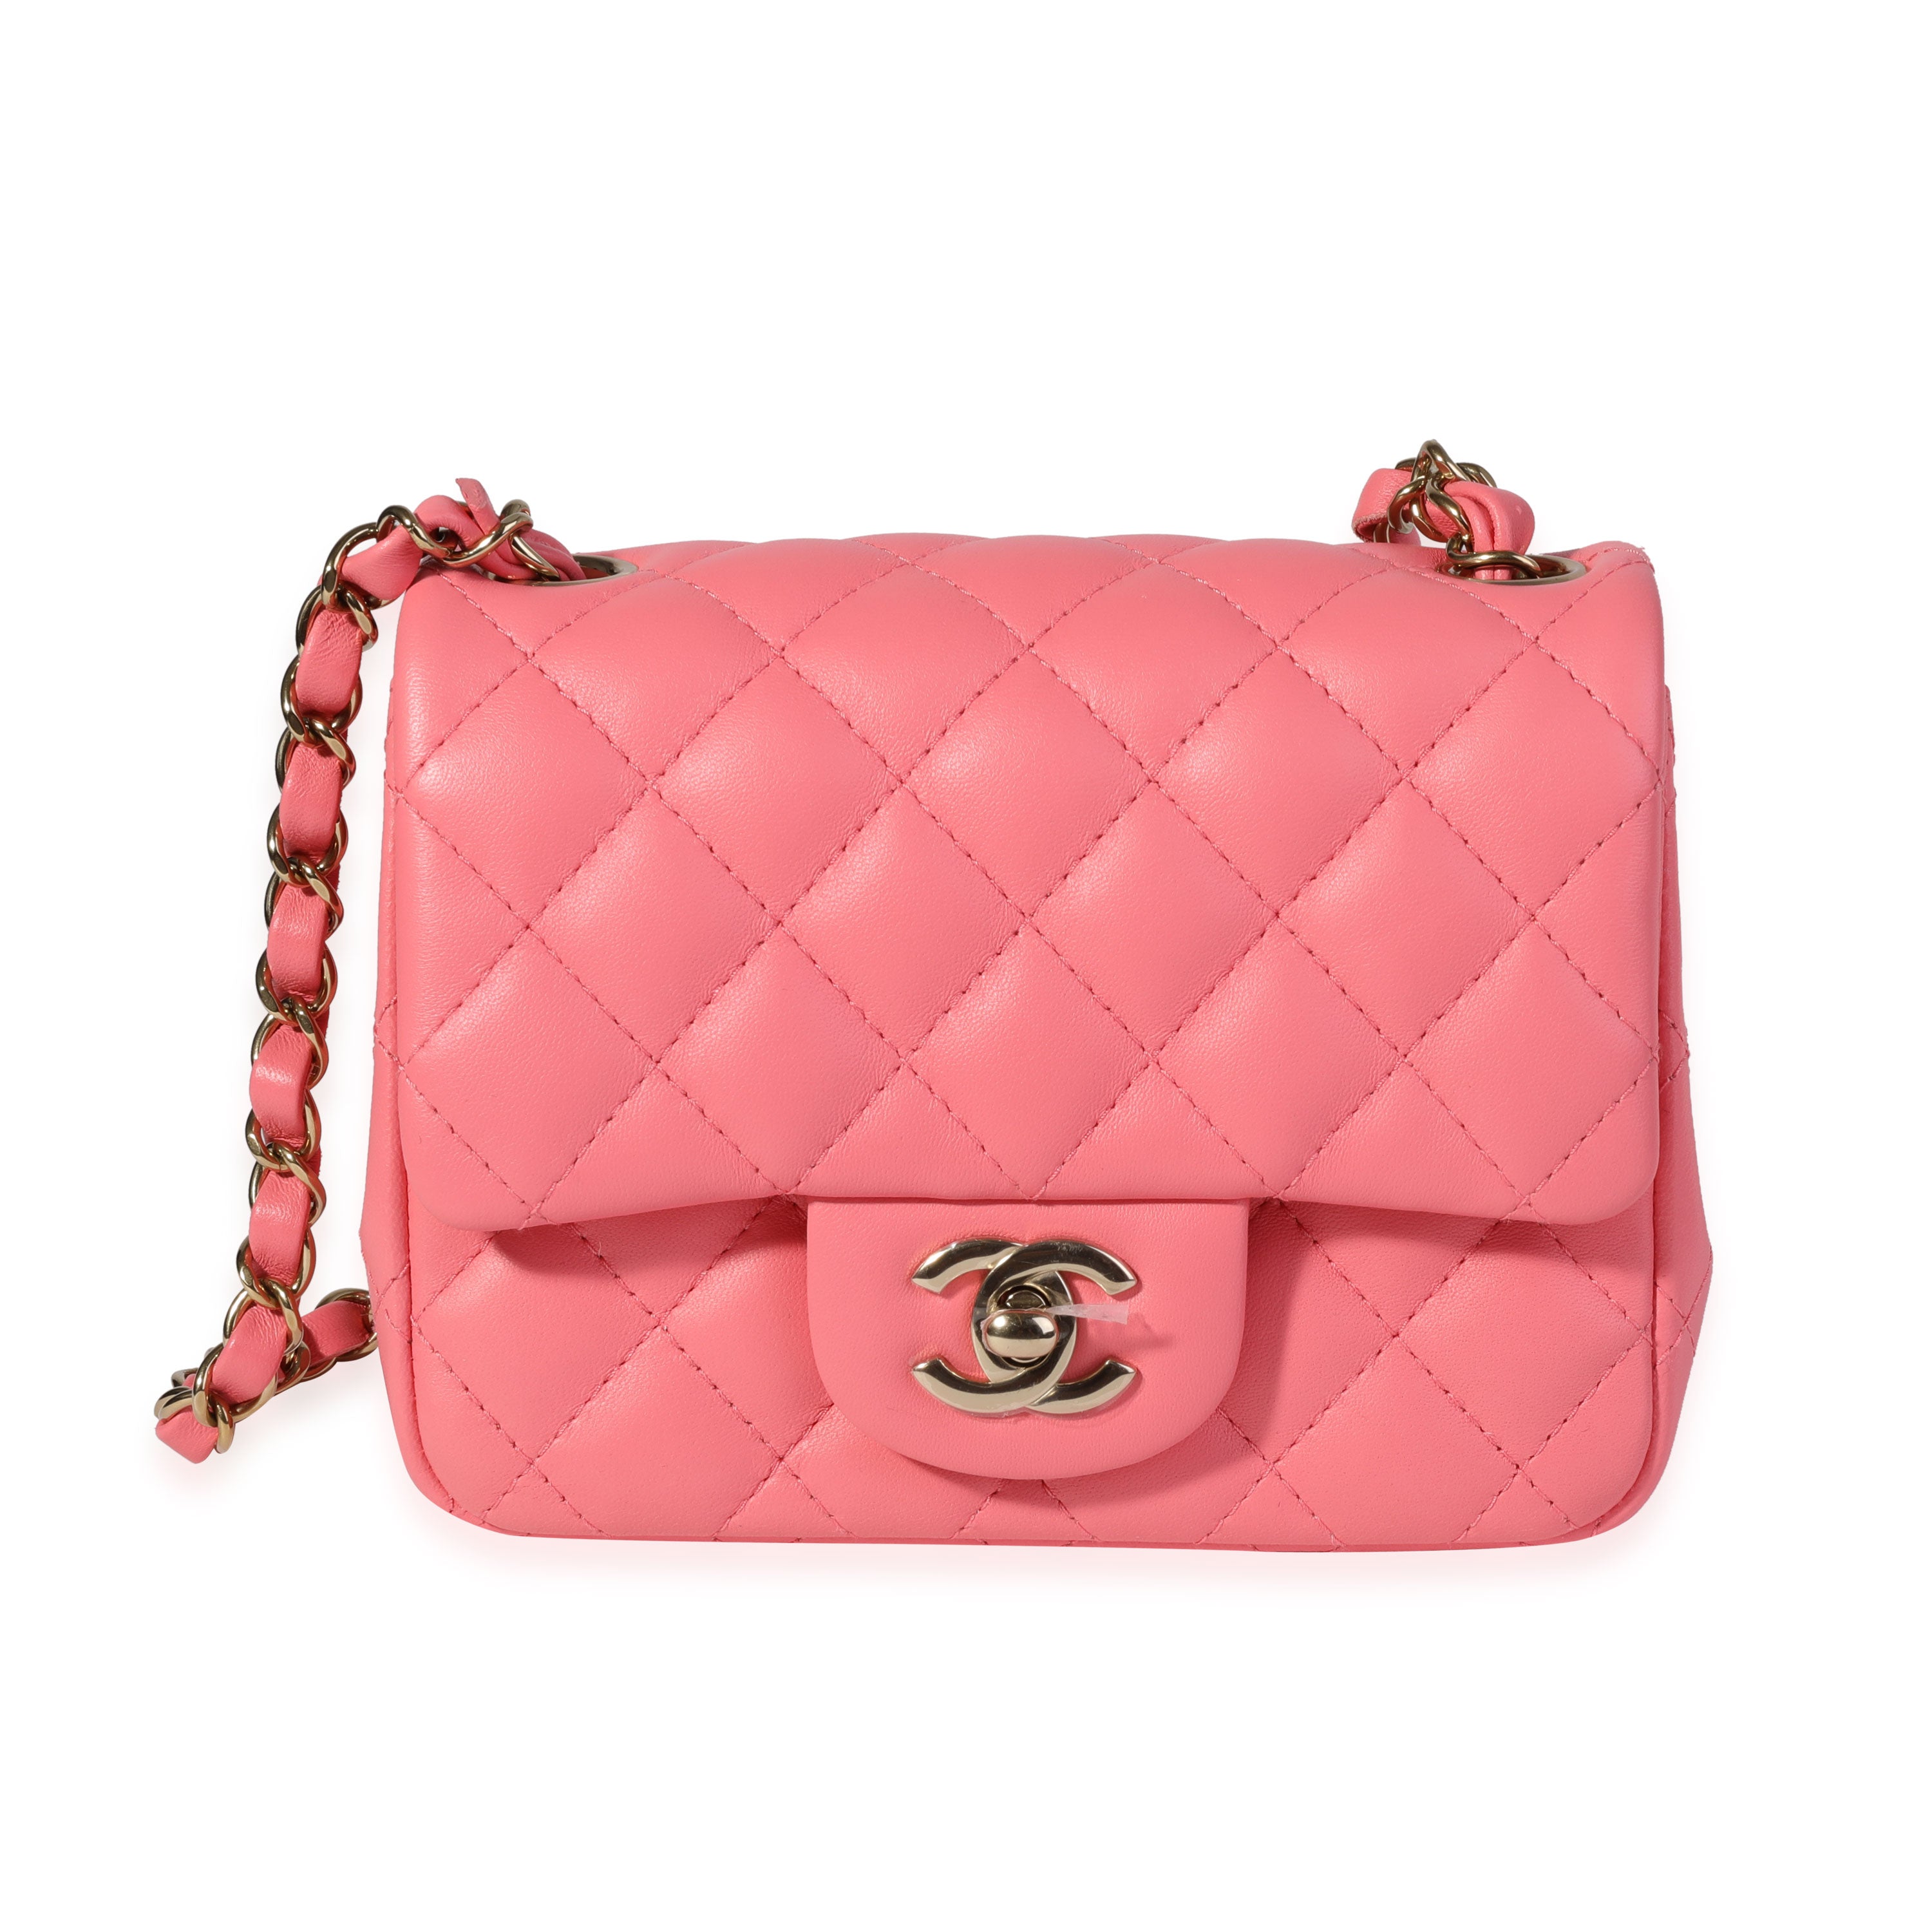 Chanel Pink Lambskin Leather Classic Medium Double Flap Bag   Shop giày  Swagger